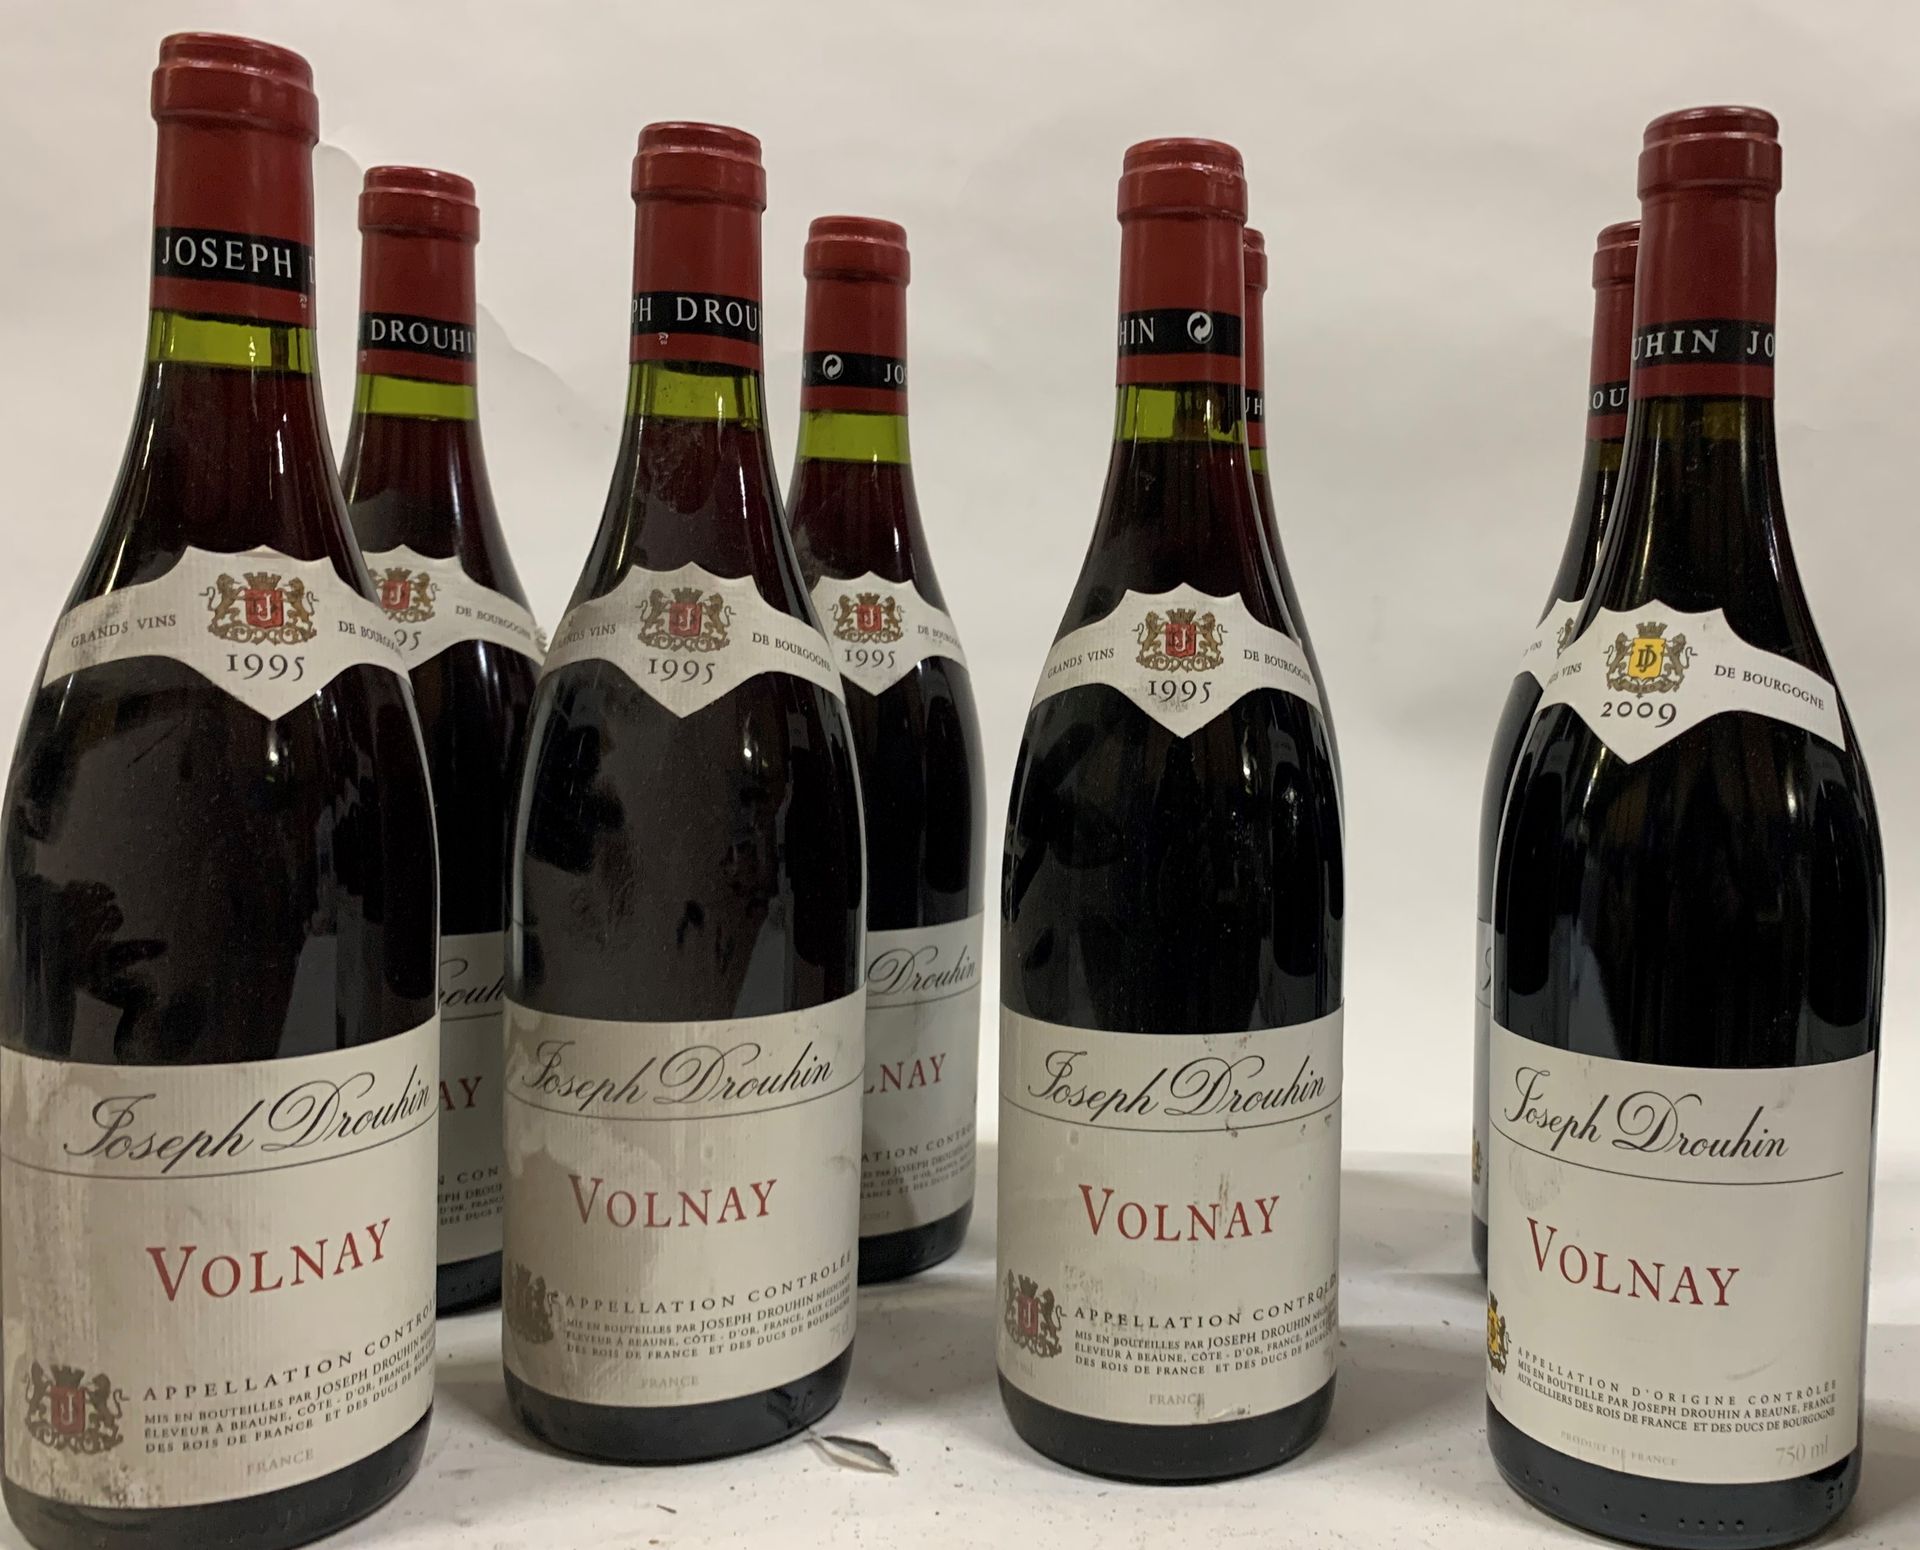 Null ● VOLNAY | Joseph Drouhin

5 bouteilles, 1995 (ES)

1 bouteille, 2007

2 bo&hellip;